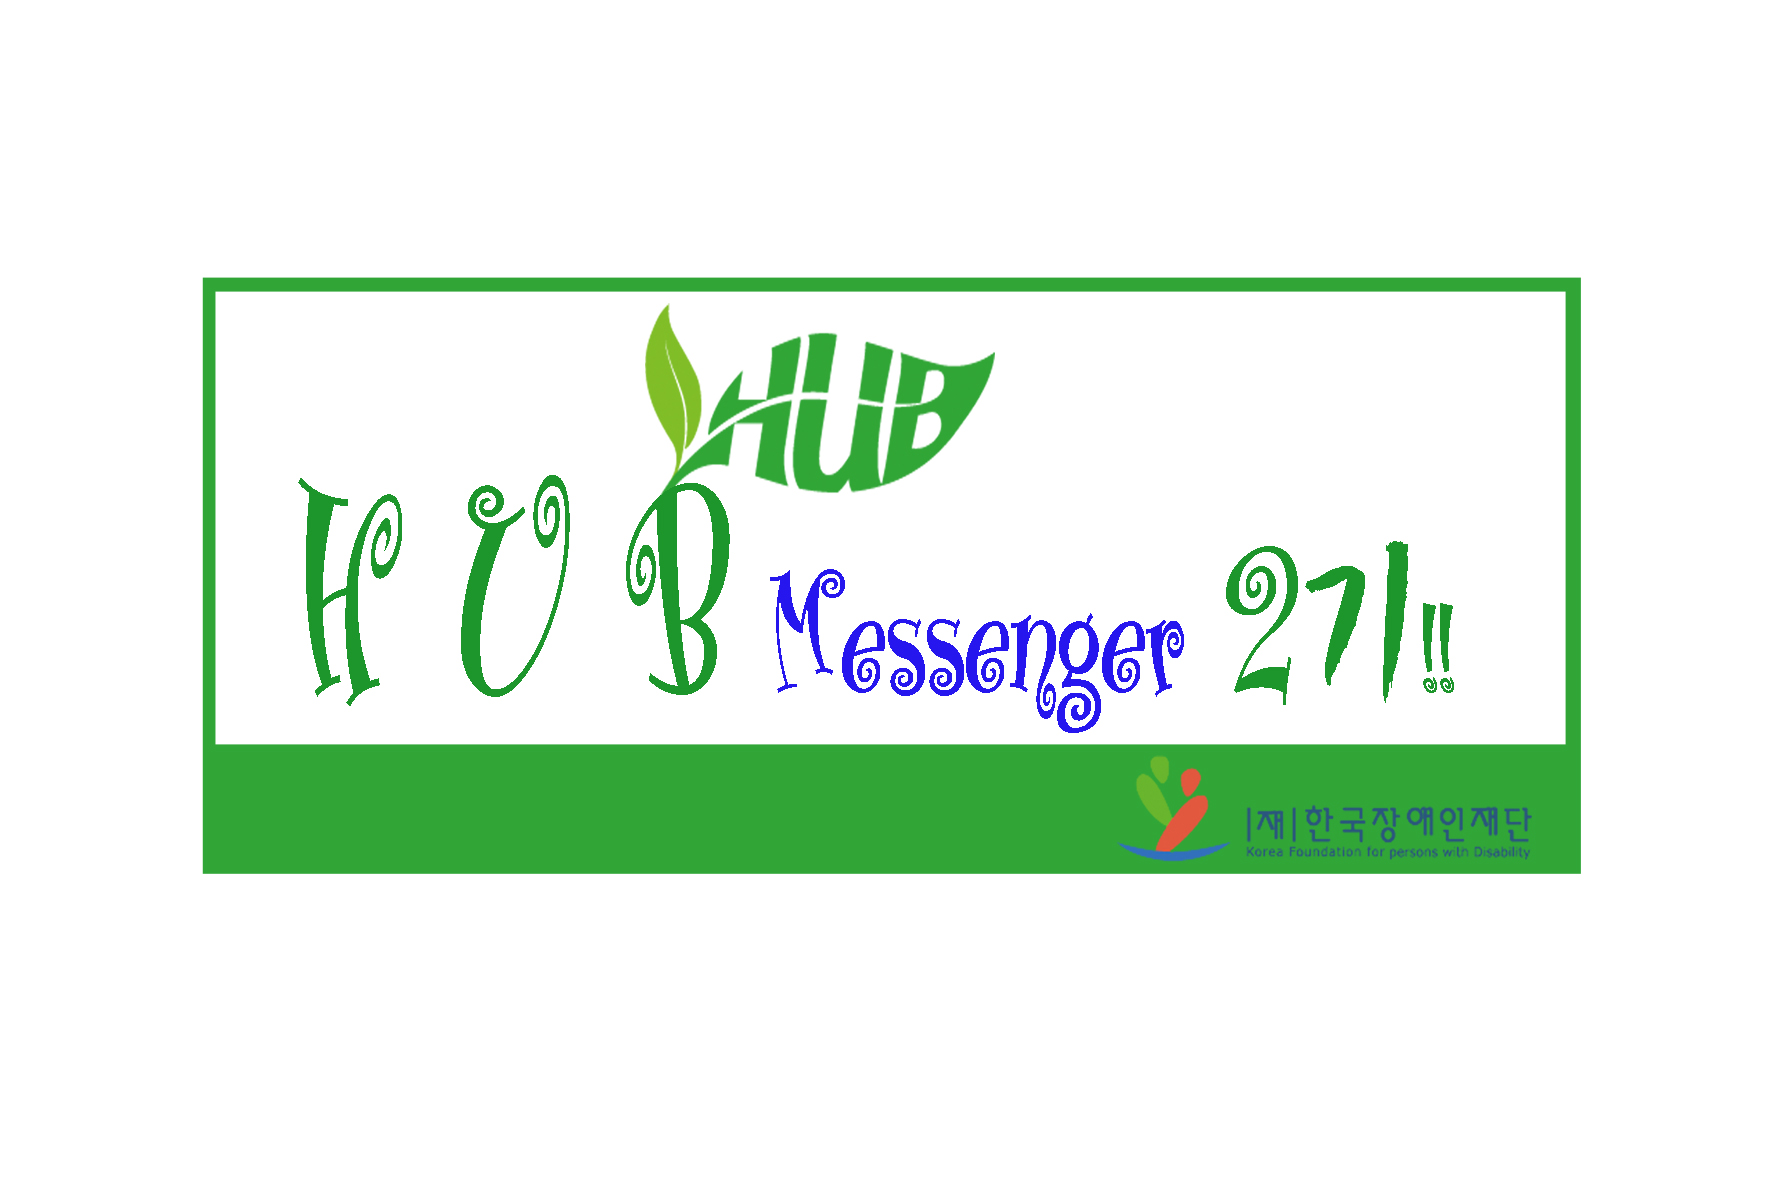 HUB messenger 2기 재 한국장애인재단 Korea Foundation for persons with Disability